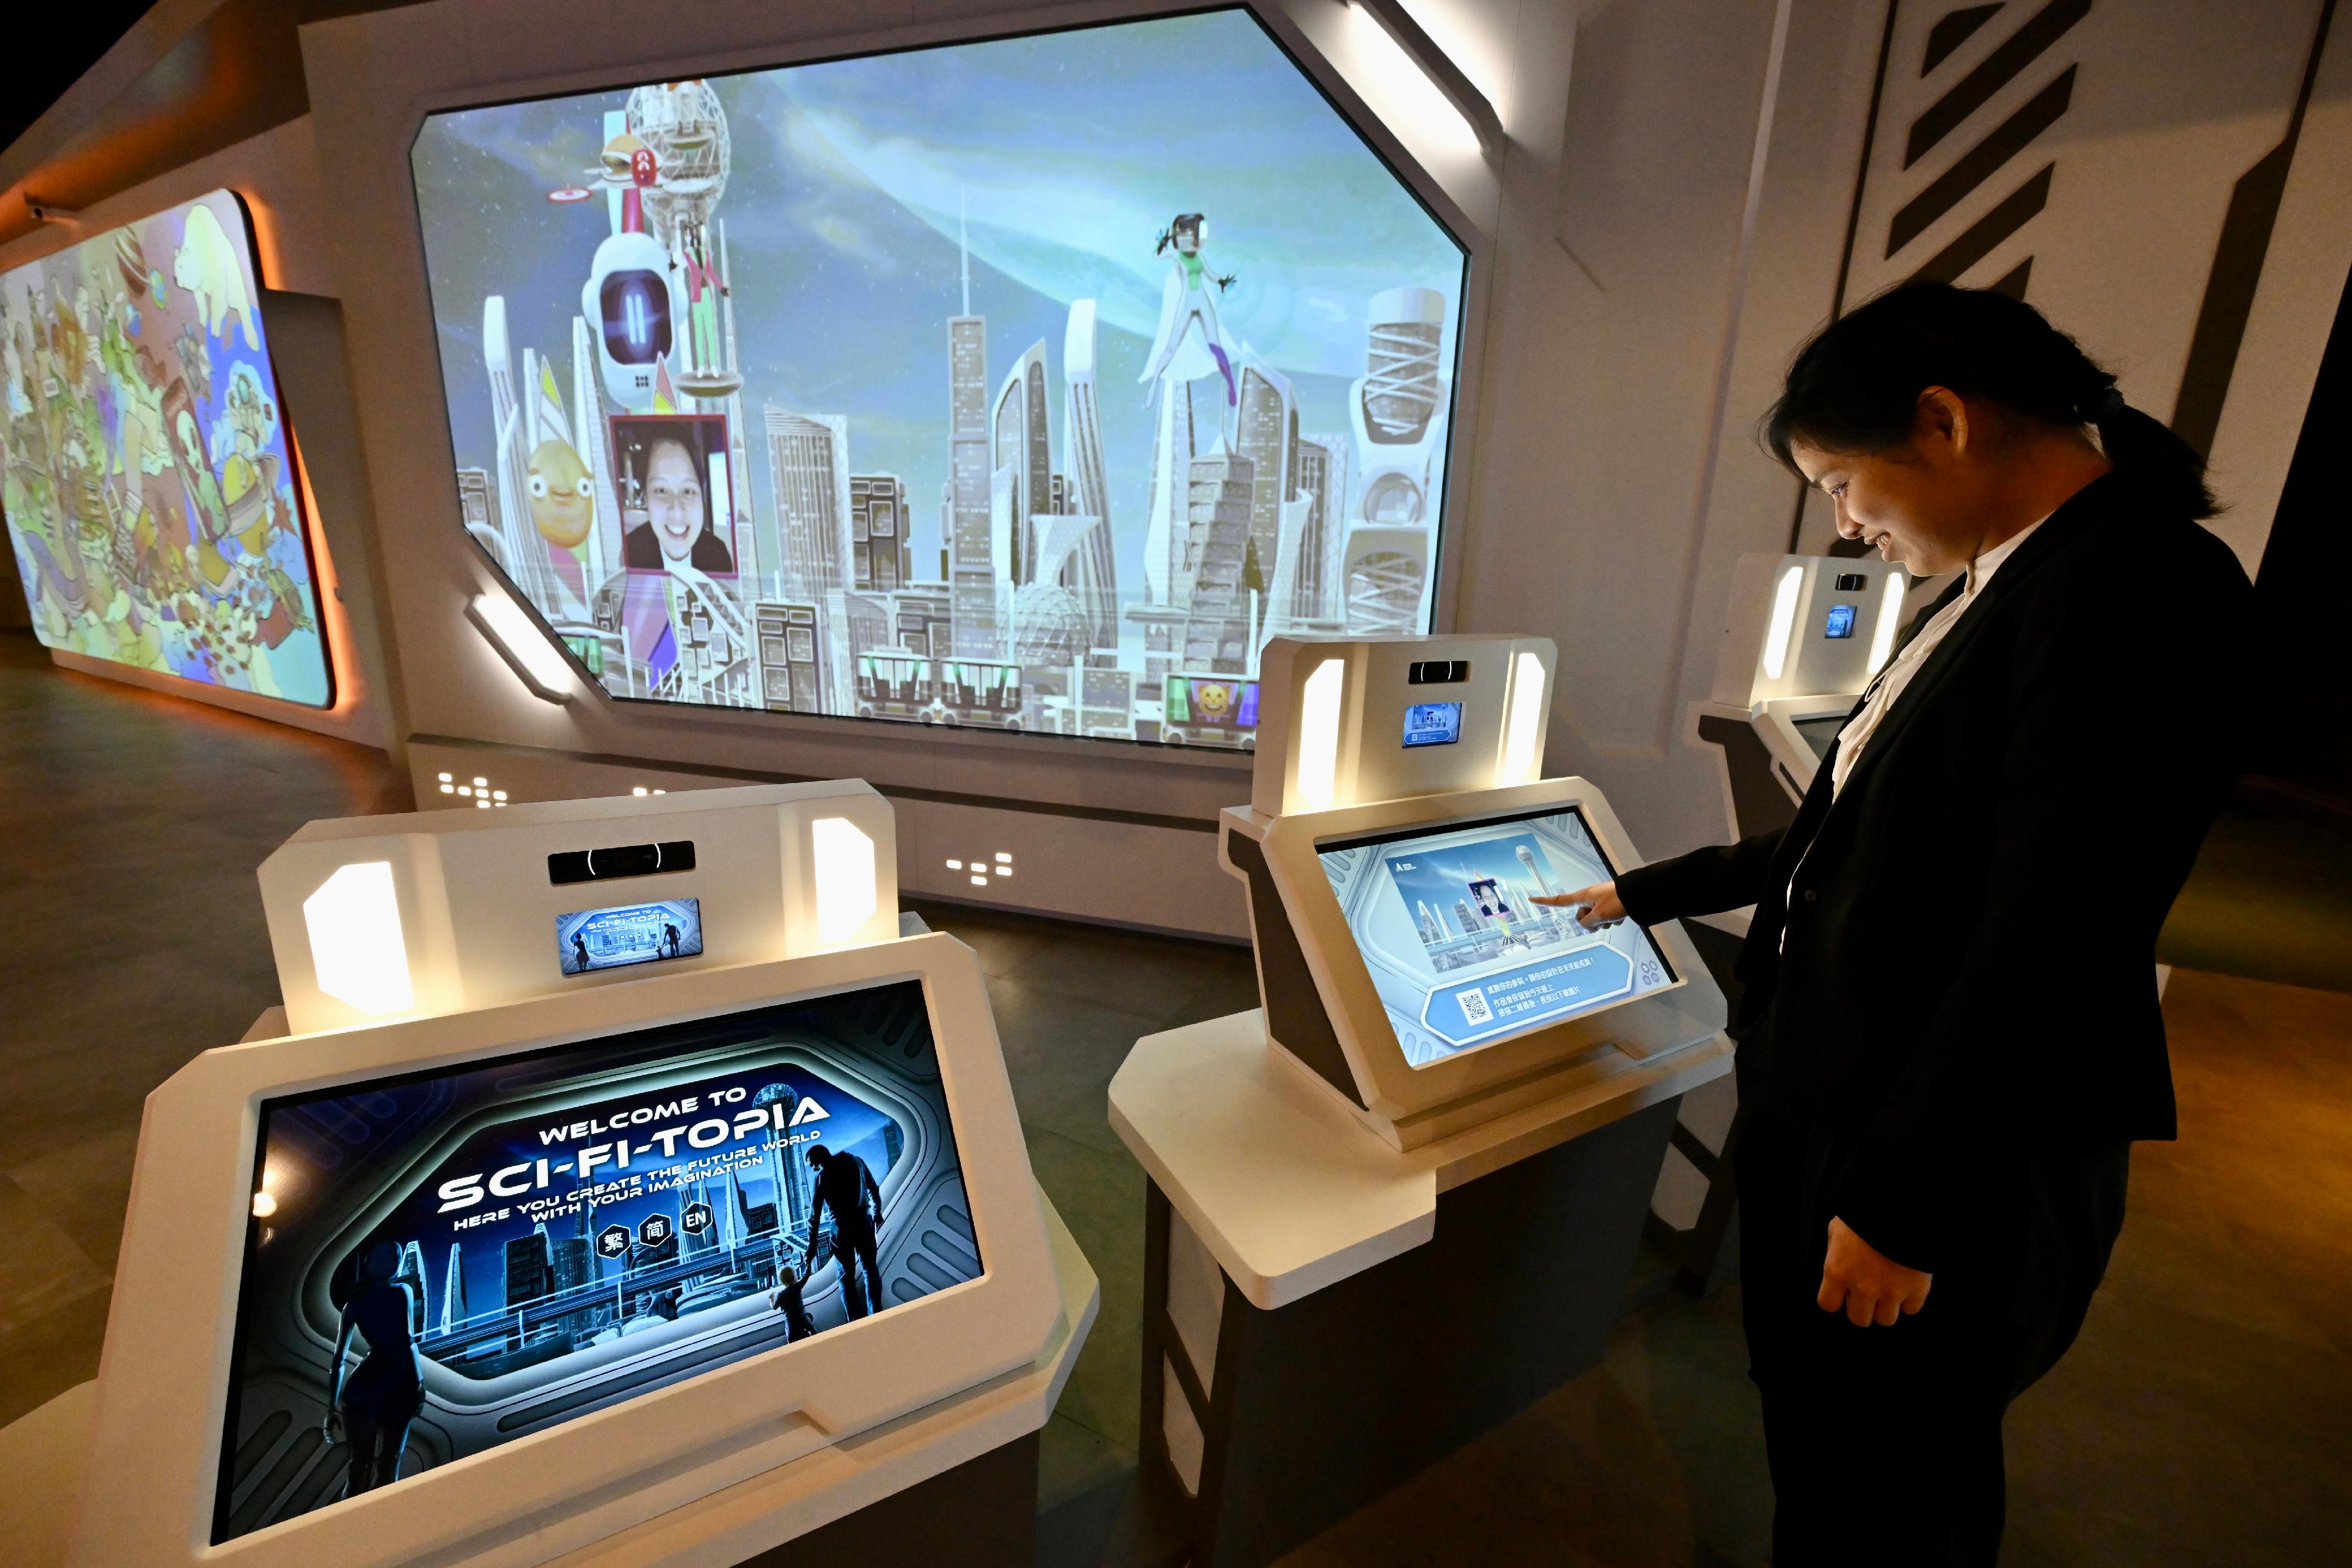 The Hong Kong Science Museum will launch a new special exhibition, "Science Fiction: Voyage to the Edge of Imagination", tomorrow (December 15). Visitors can combine their creativity and technology to build a science fiction-topia through the interactive installation at the exhibition gallery. 